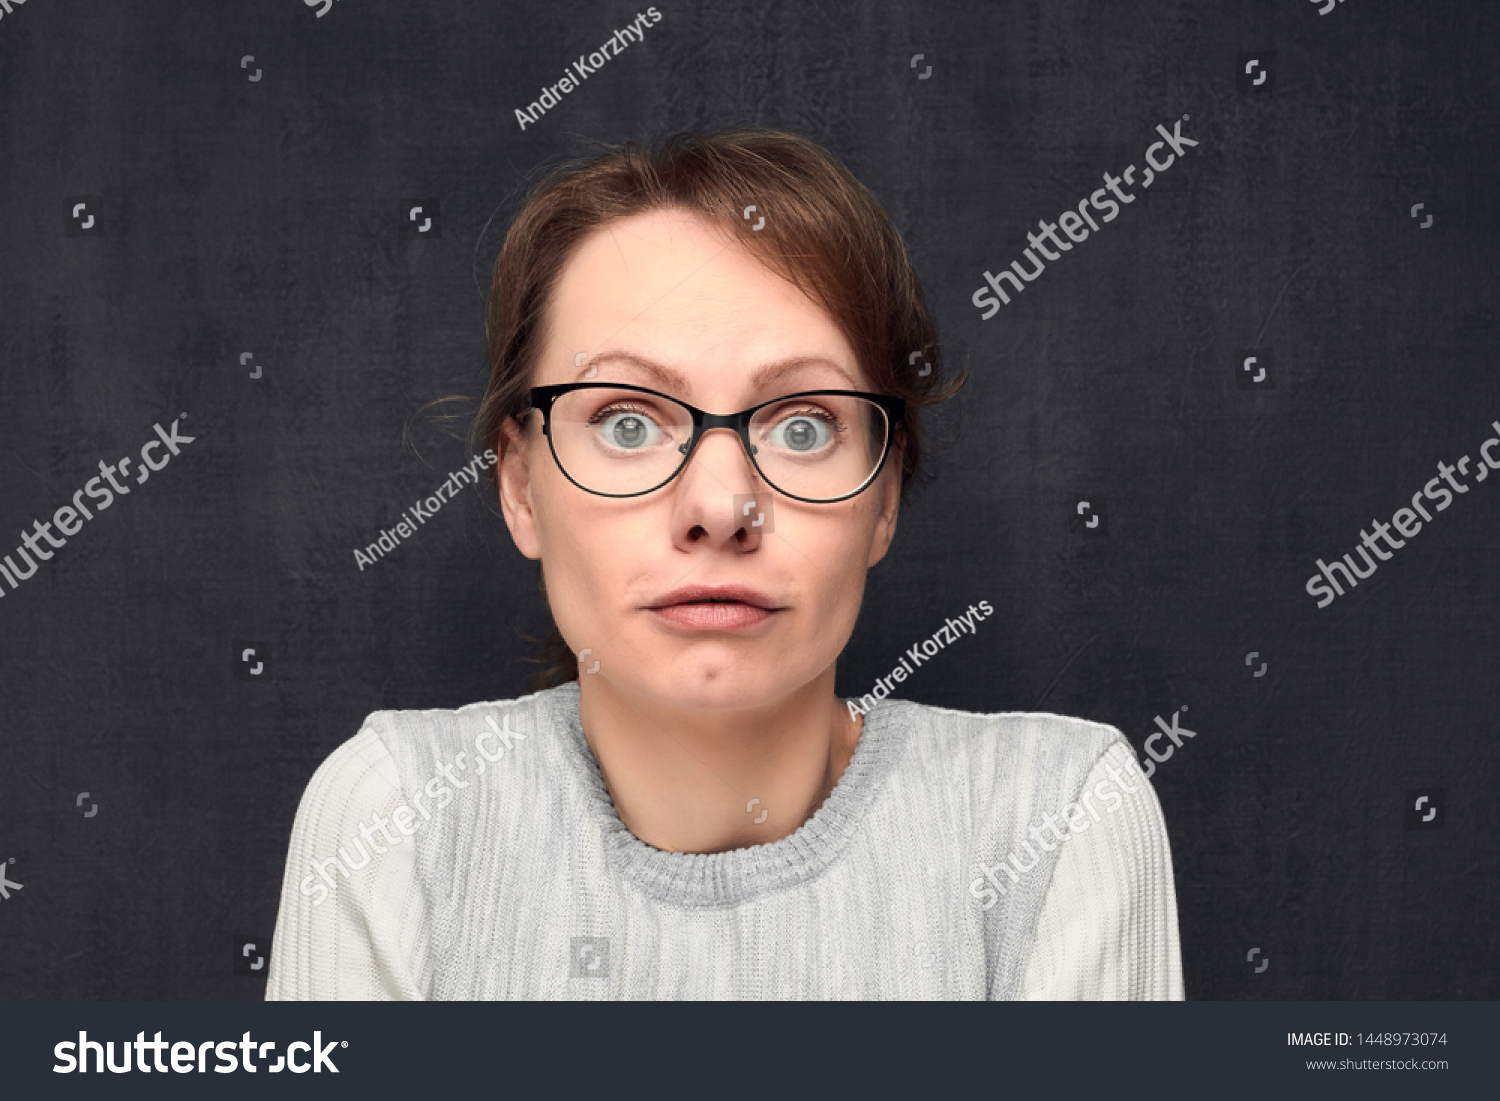 Studio close-up portrait of cute and funny caucasian fair-haired girl with eyeglasses, silly grimacing and looking naively and with bewilderment at camera, against gray background. Headshot #1448973074